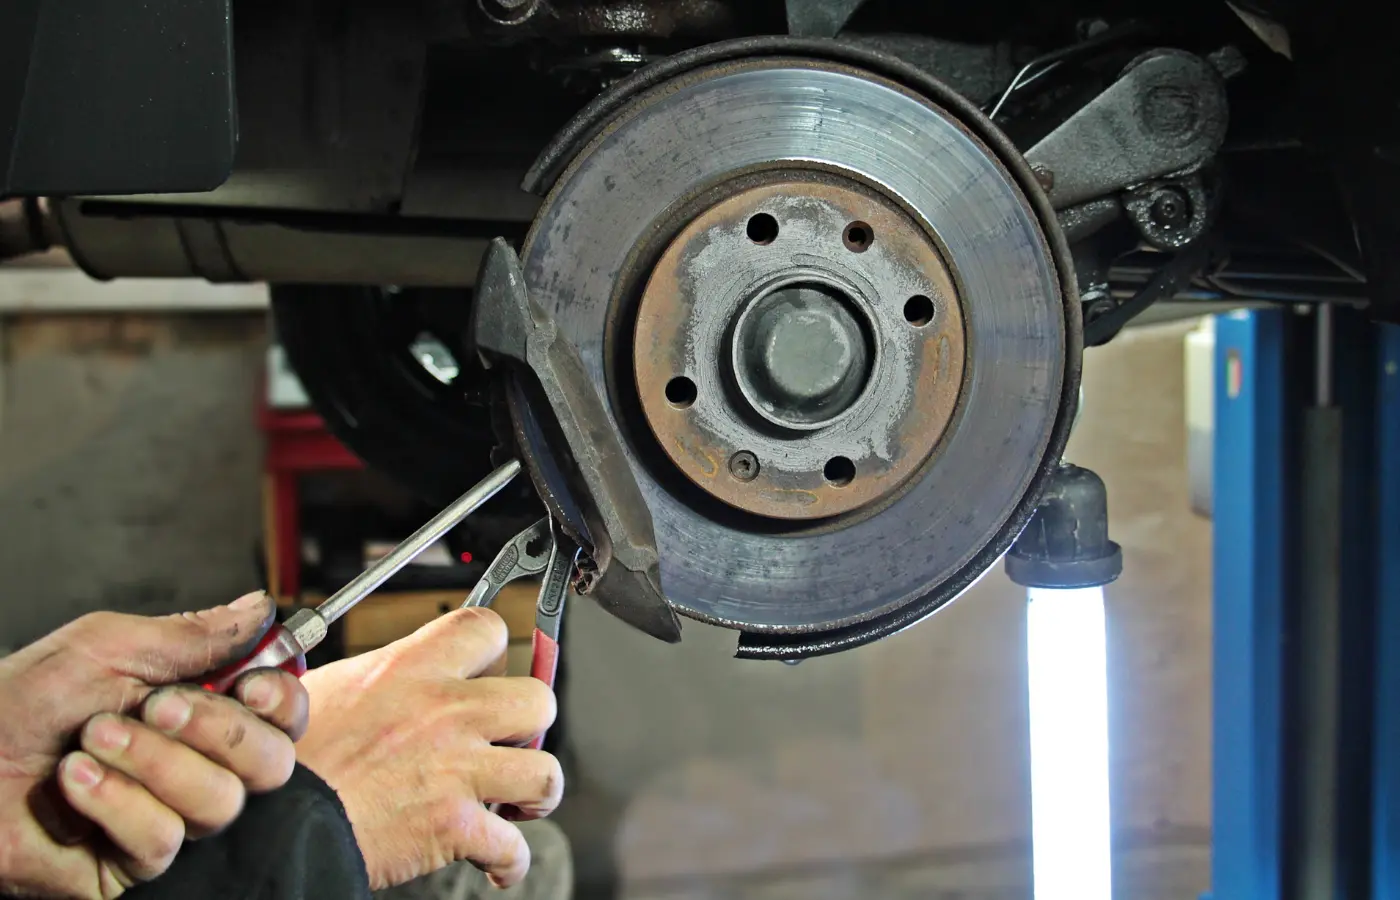 6 ways to keep your RV's brakes in good shape